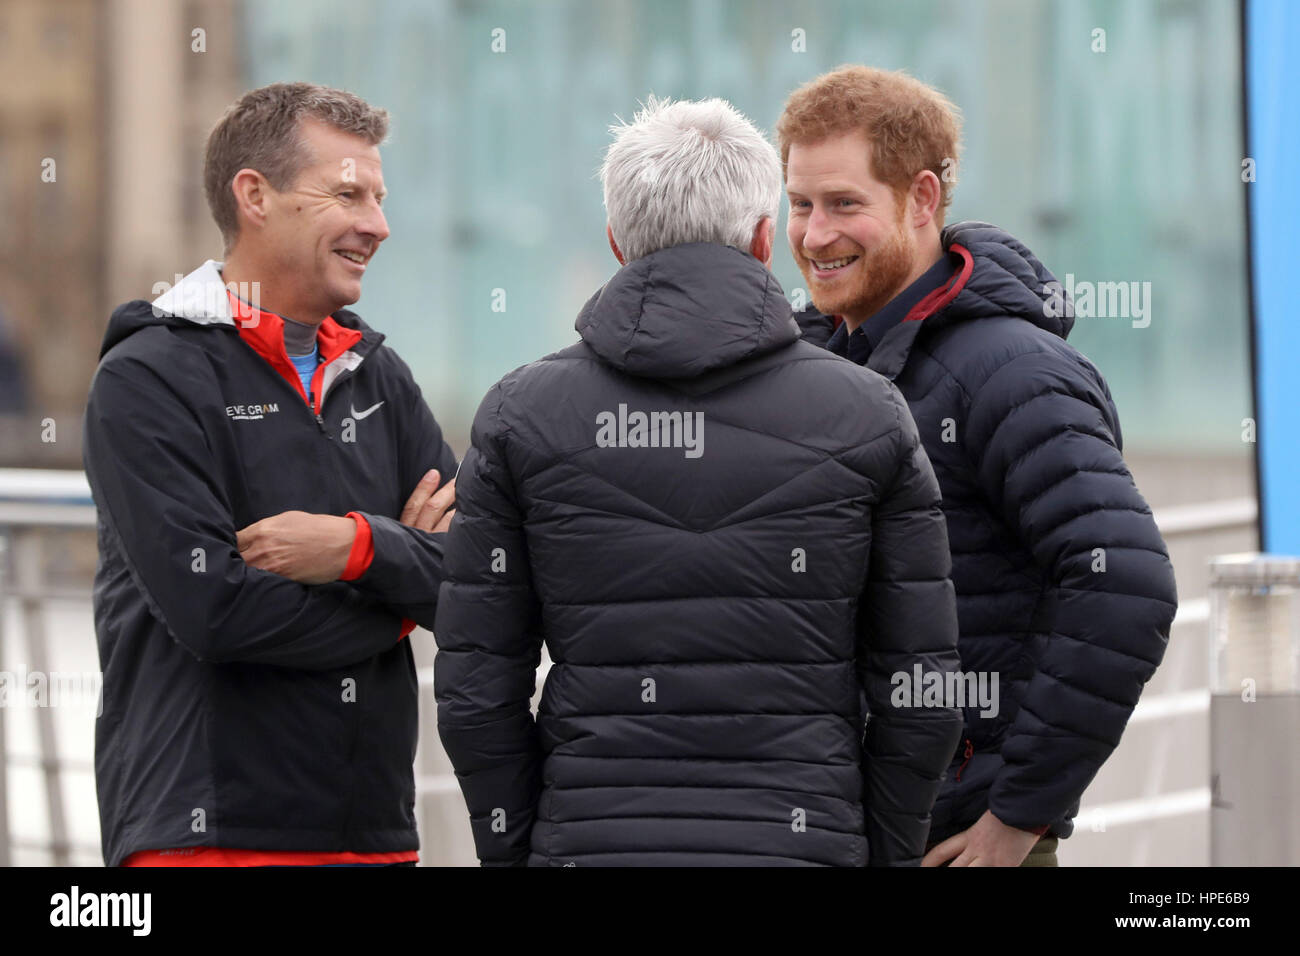 Prince Harry at the Quayside in Gateshead with Steve Cram and Jonathan Edwards as they train runners taking part in the London Marathon for mental health charity Heads Together. Stock Photo